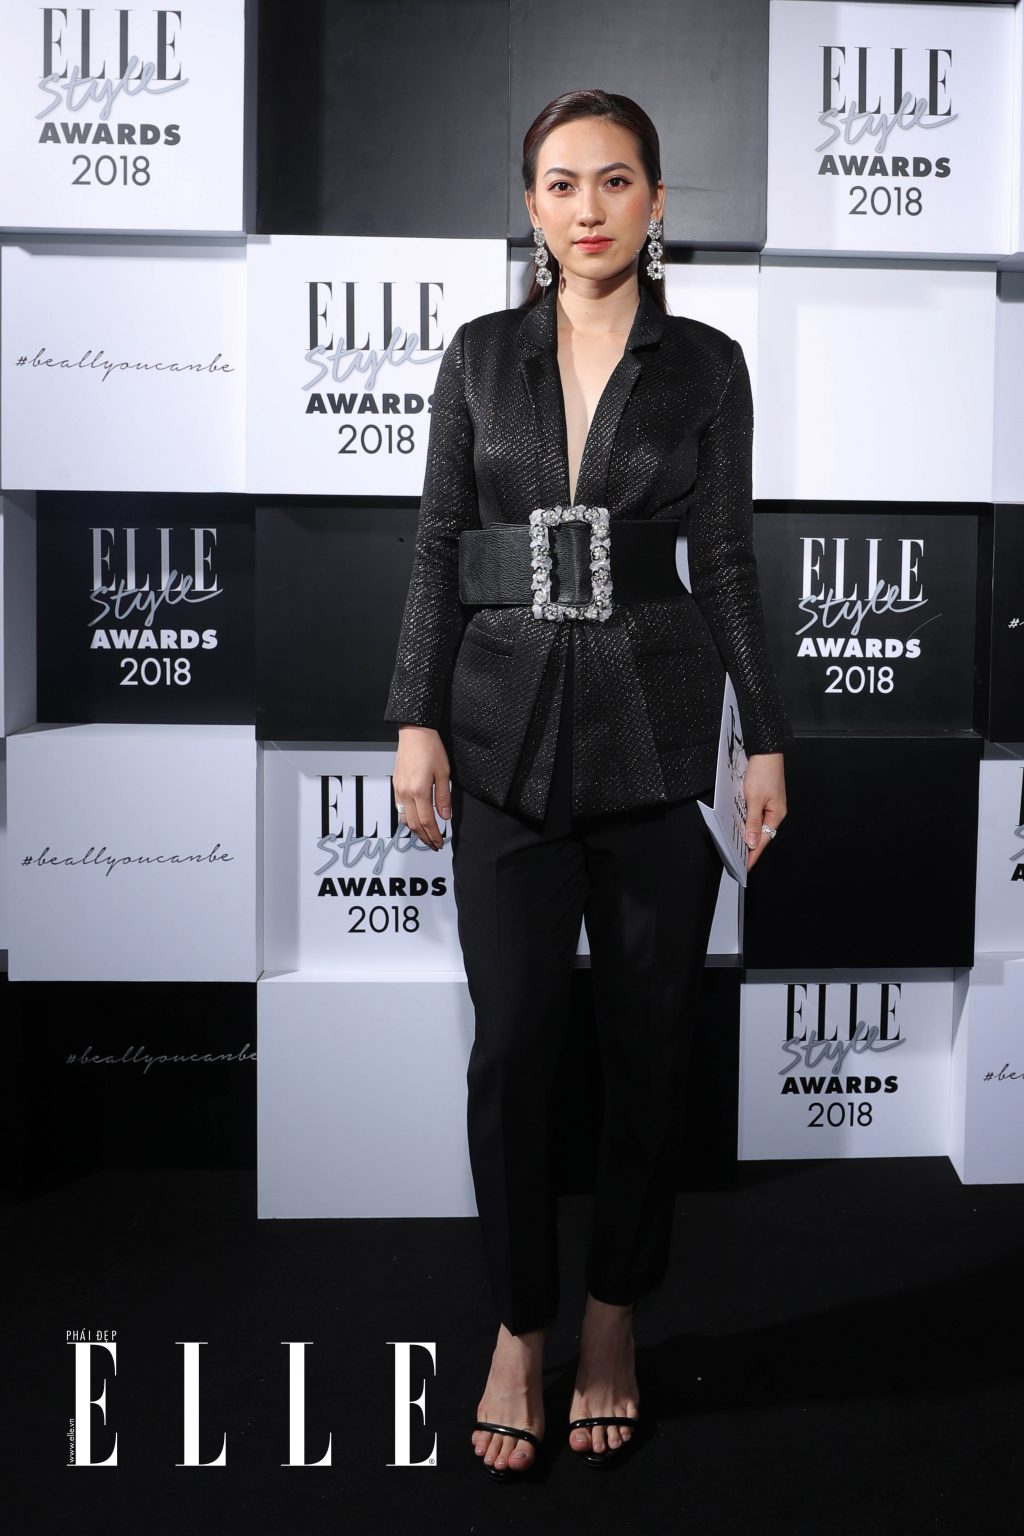 ELLE Style Awards 2018 Phuong Anh Dao